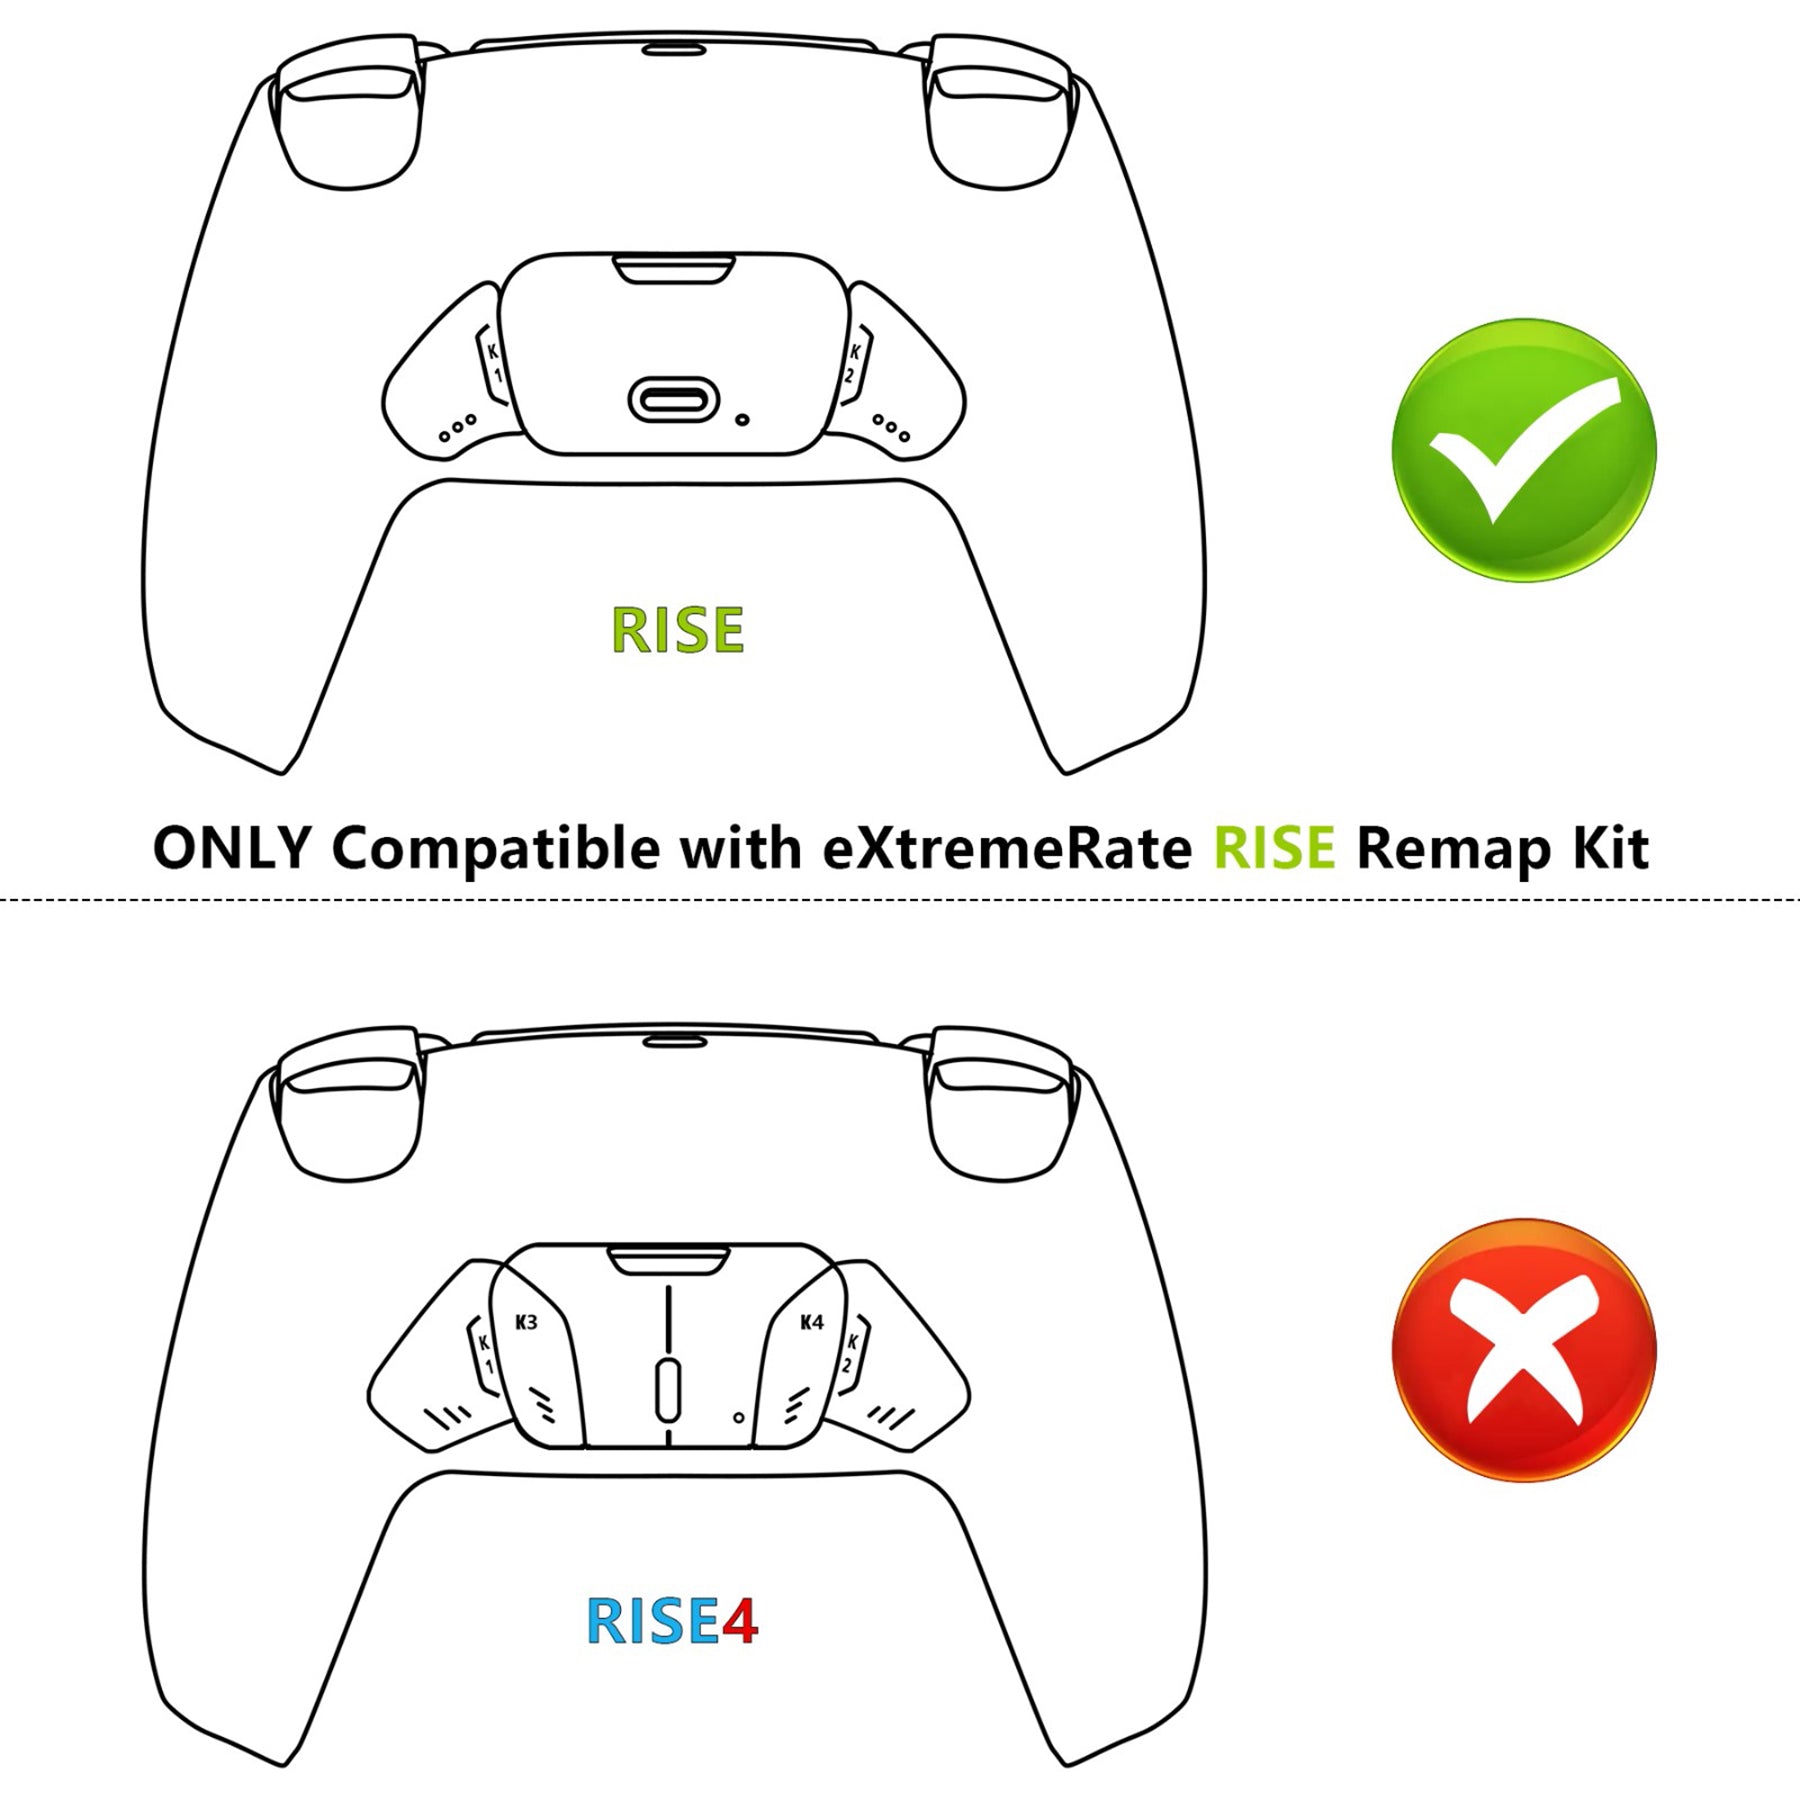 eXtremeRate Replacement Redesigned K1 K2 Back Buttons for eXtremerate RISE Remap Kit, Compatible with PS5 Controller - Nova Pink eXtremeRate